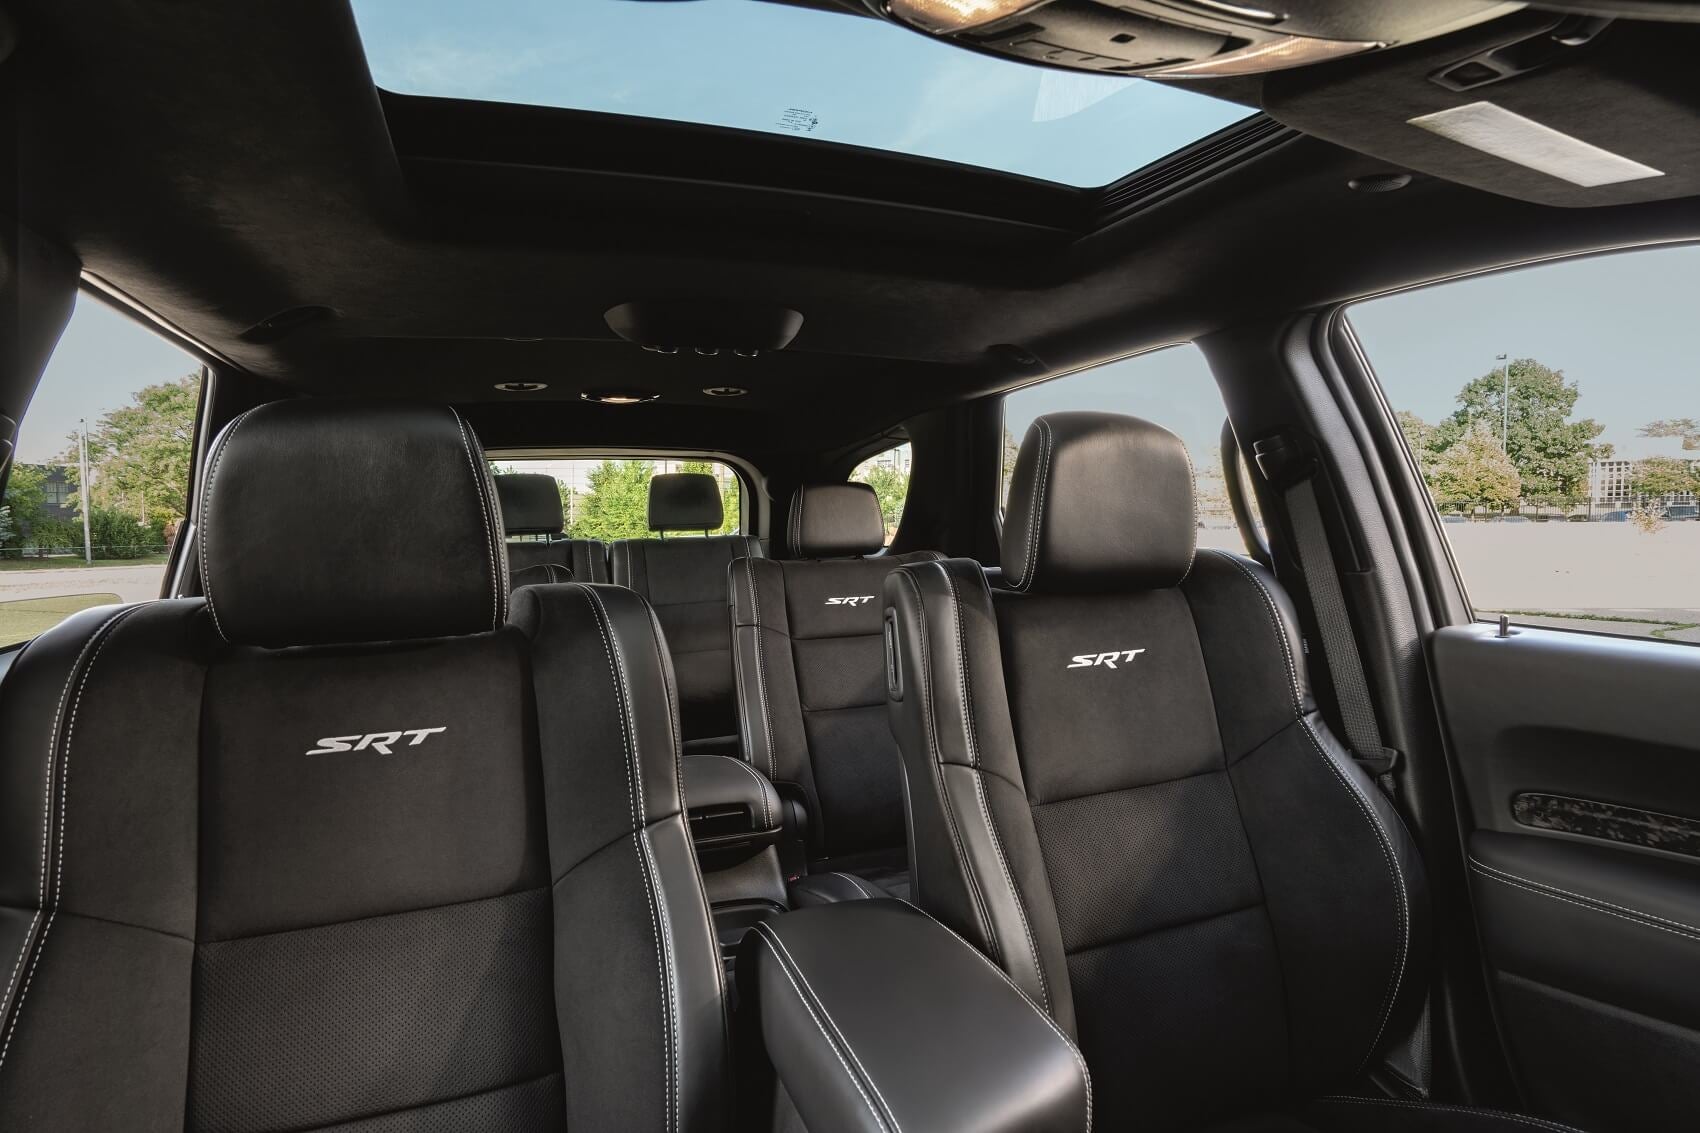 2022 Dodge Durango: An Abundance of Comfort and Stowing inside the Cabin